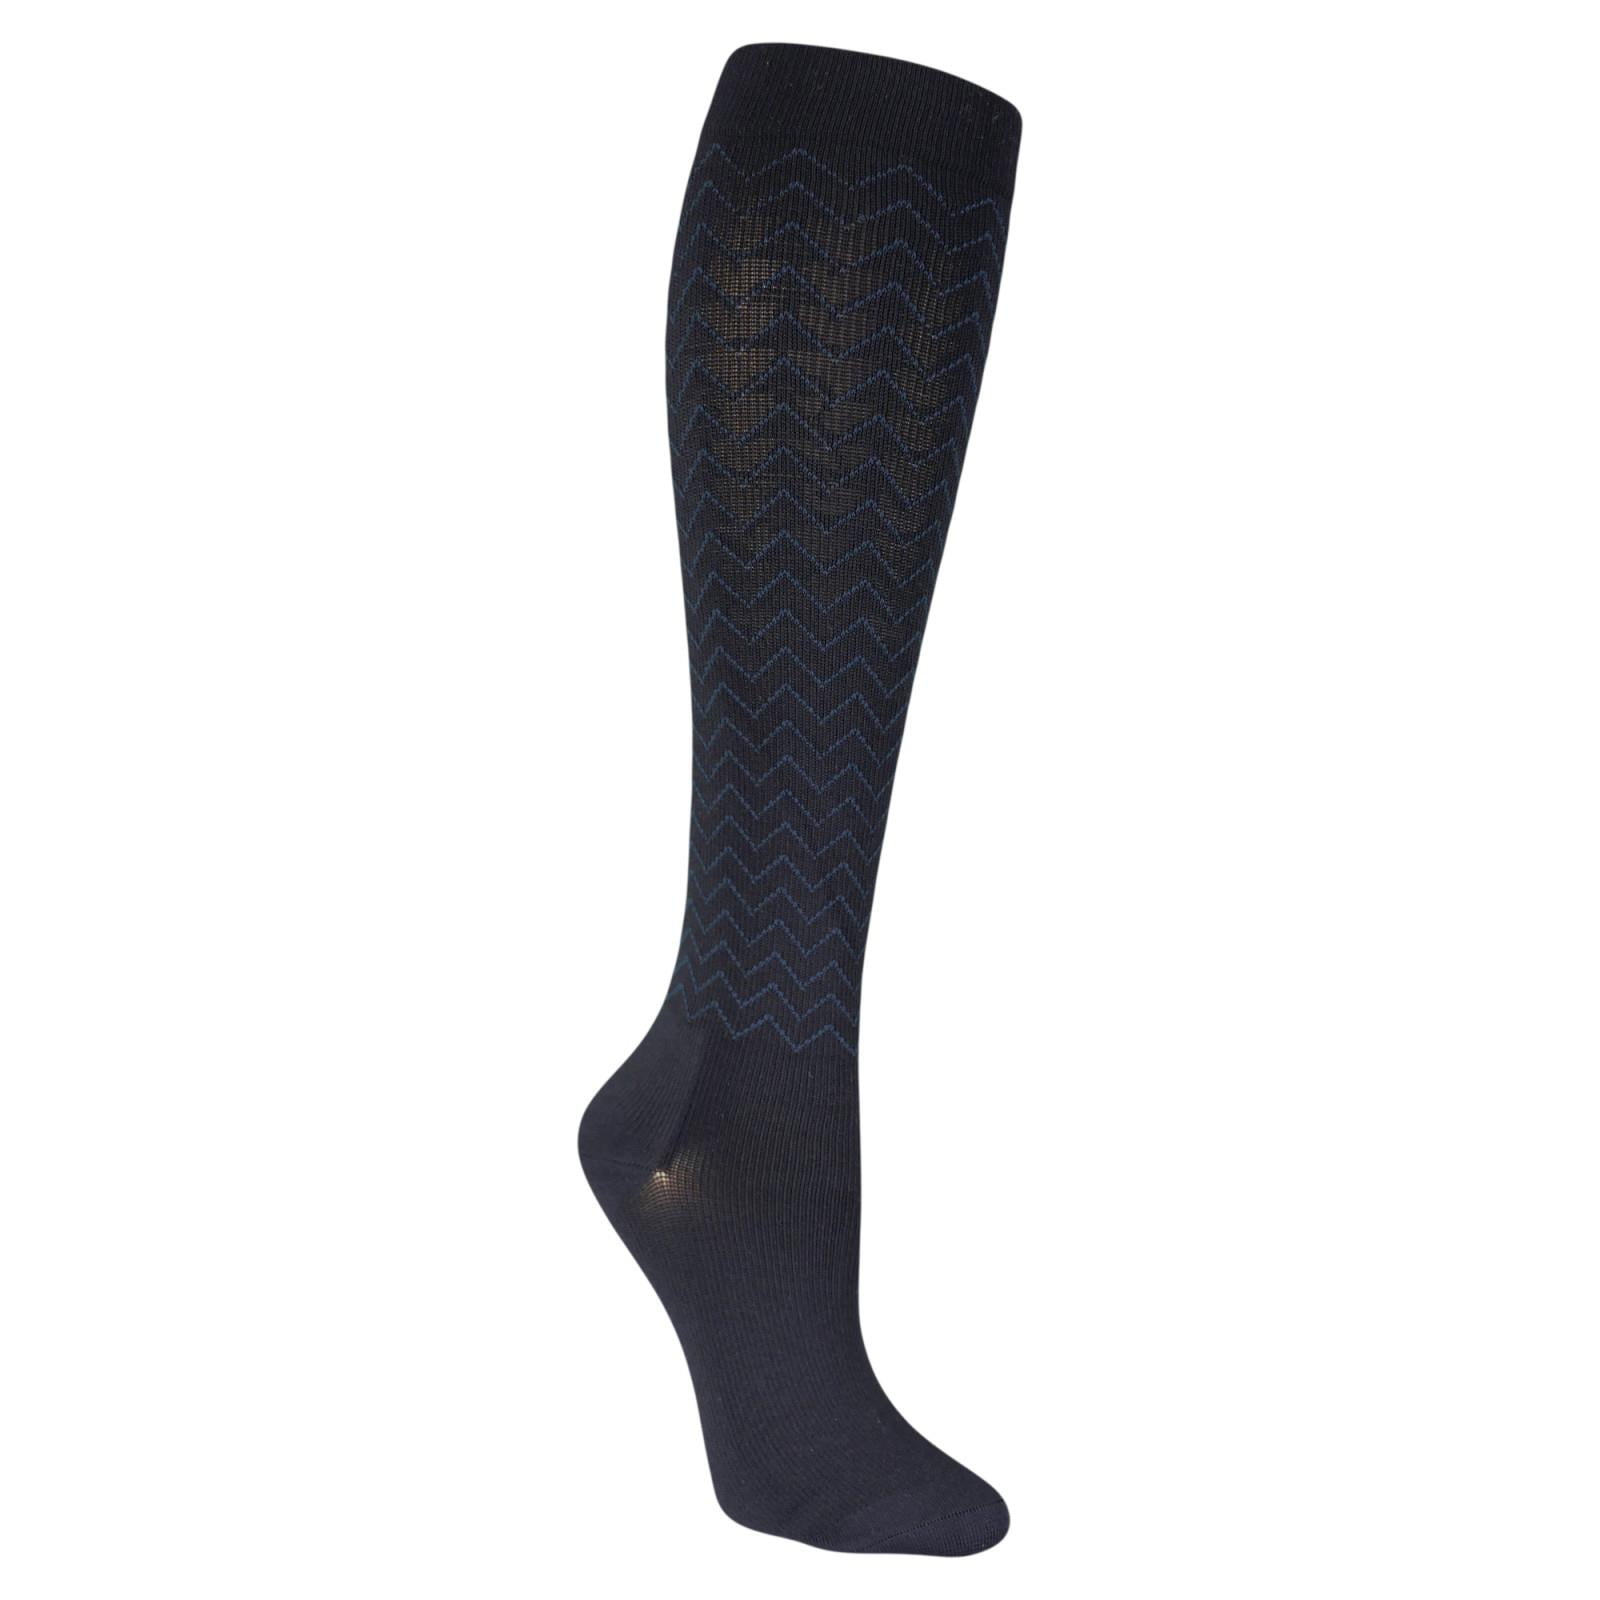 Dr. Scholls Womens American Lifestyle Collection Knee High Compression ...